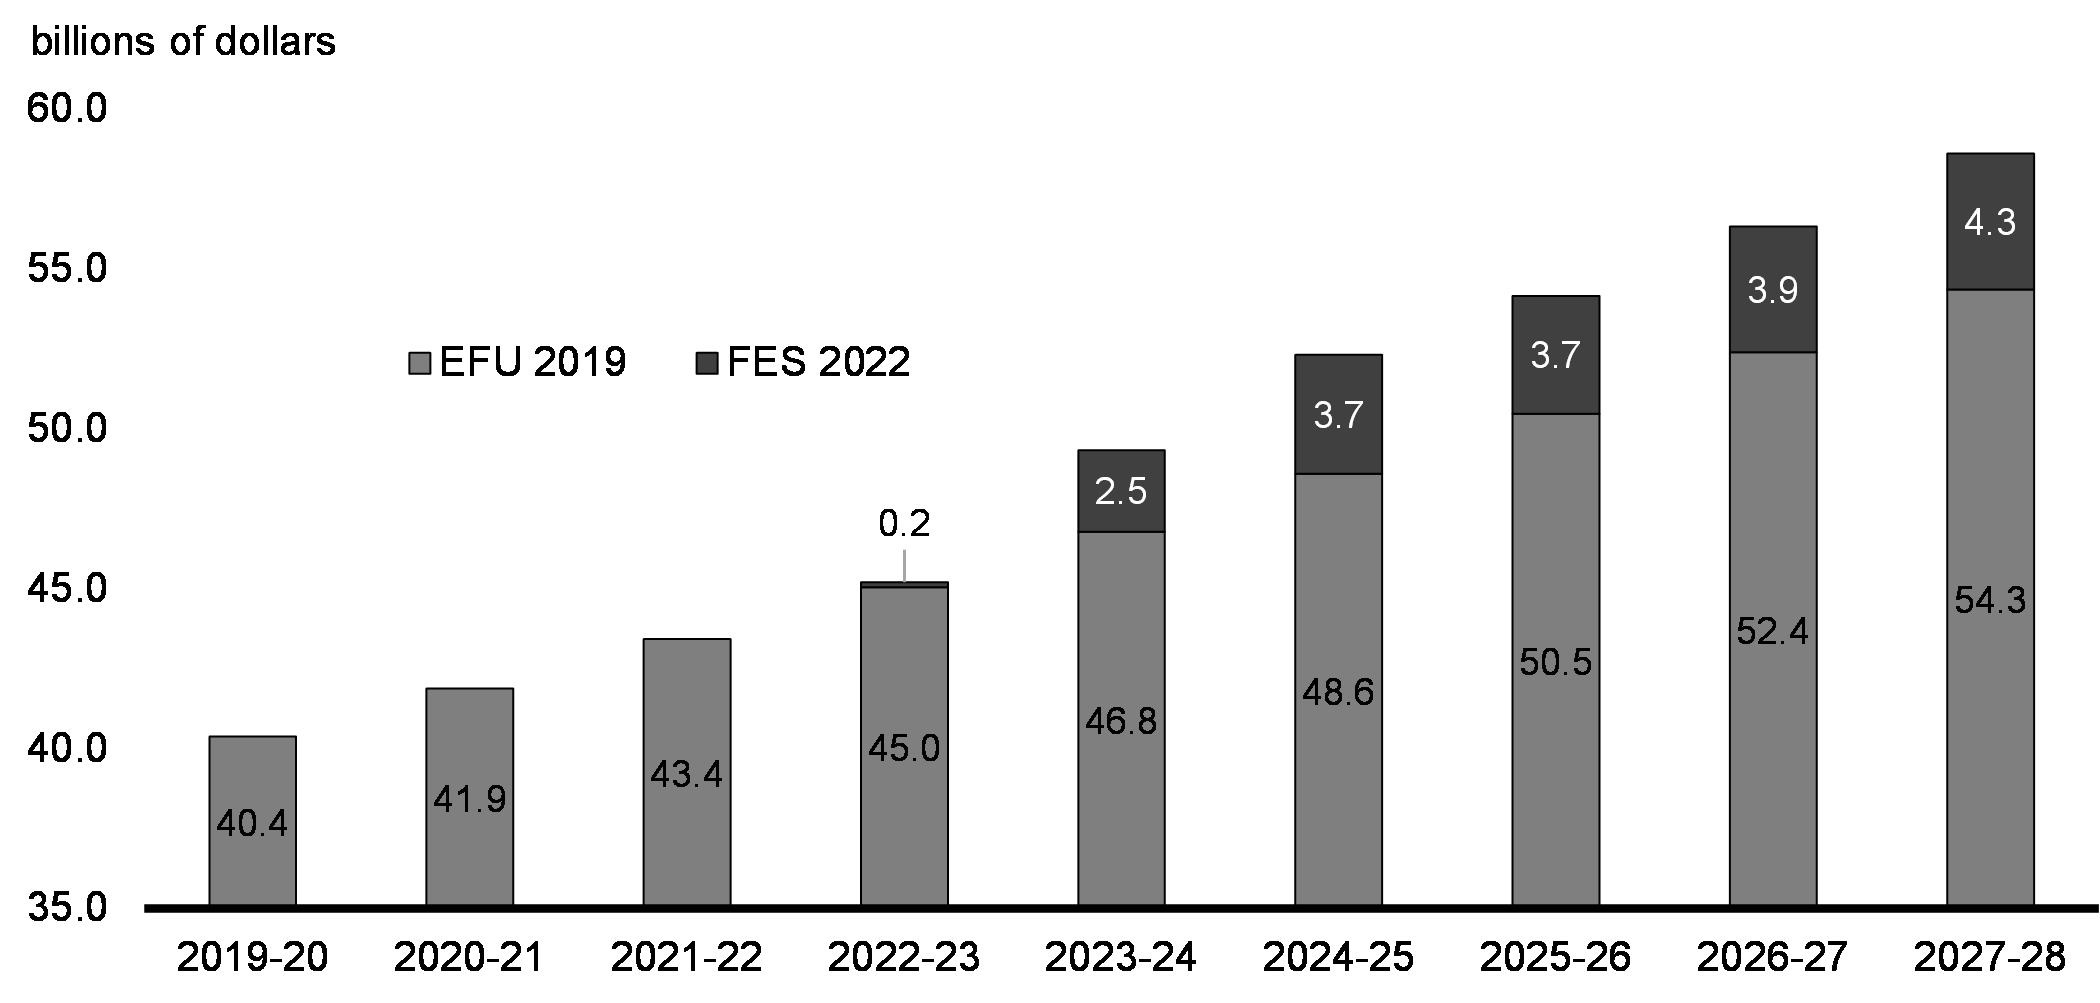 Chart A1.3: Canada Health Transfer Forecast - Economic and Fiscal Update 2019 vs. Fall Economic Statement 2022